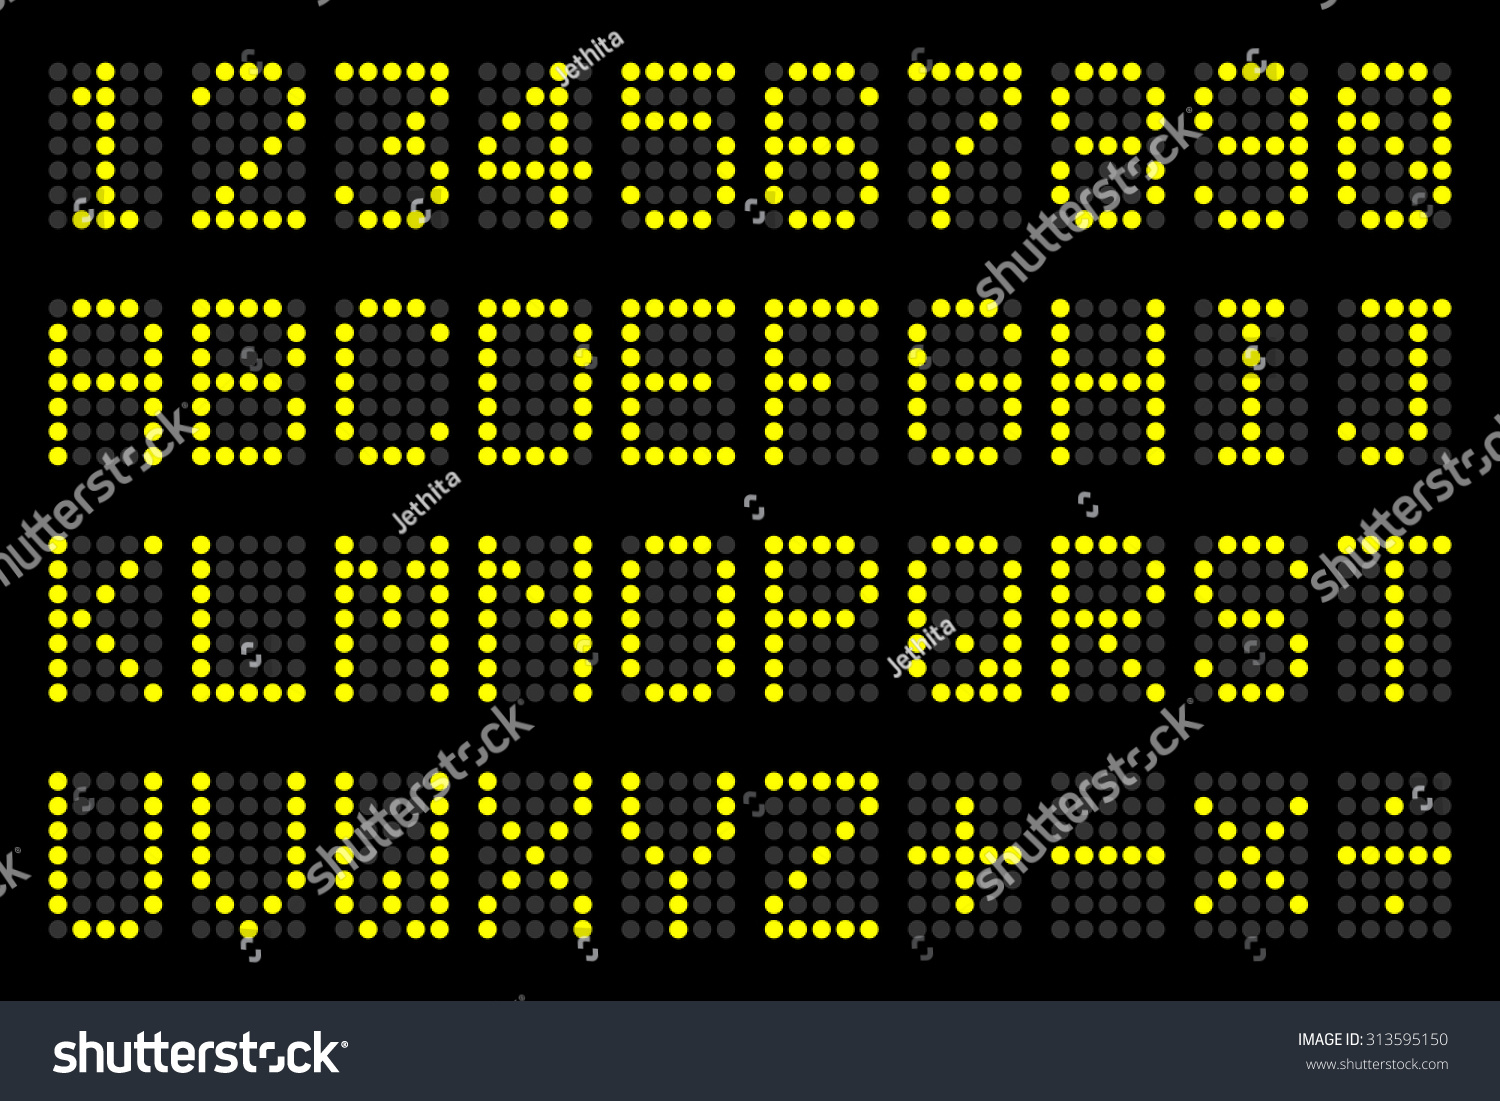 SVG of digital  letters and numbers display board for airport schedules, train timetables, scoreboard etc. svg